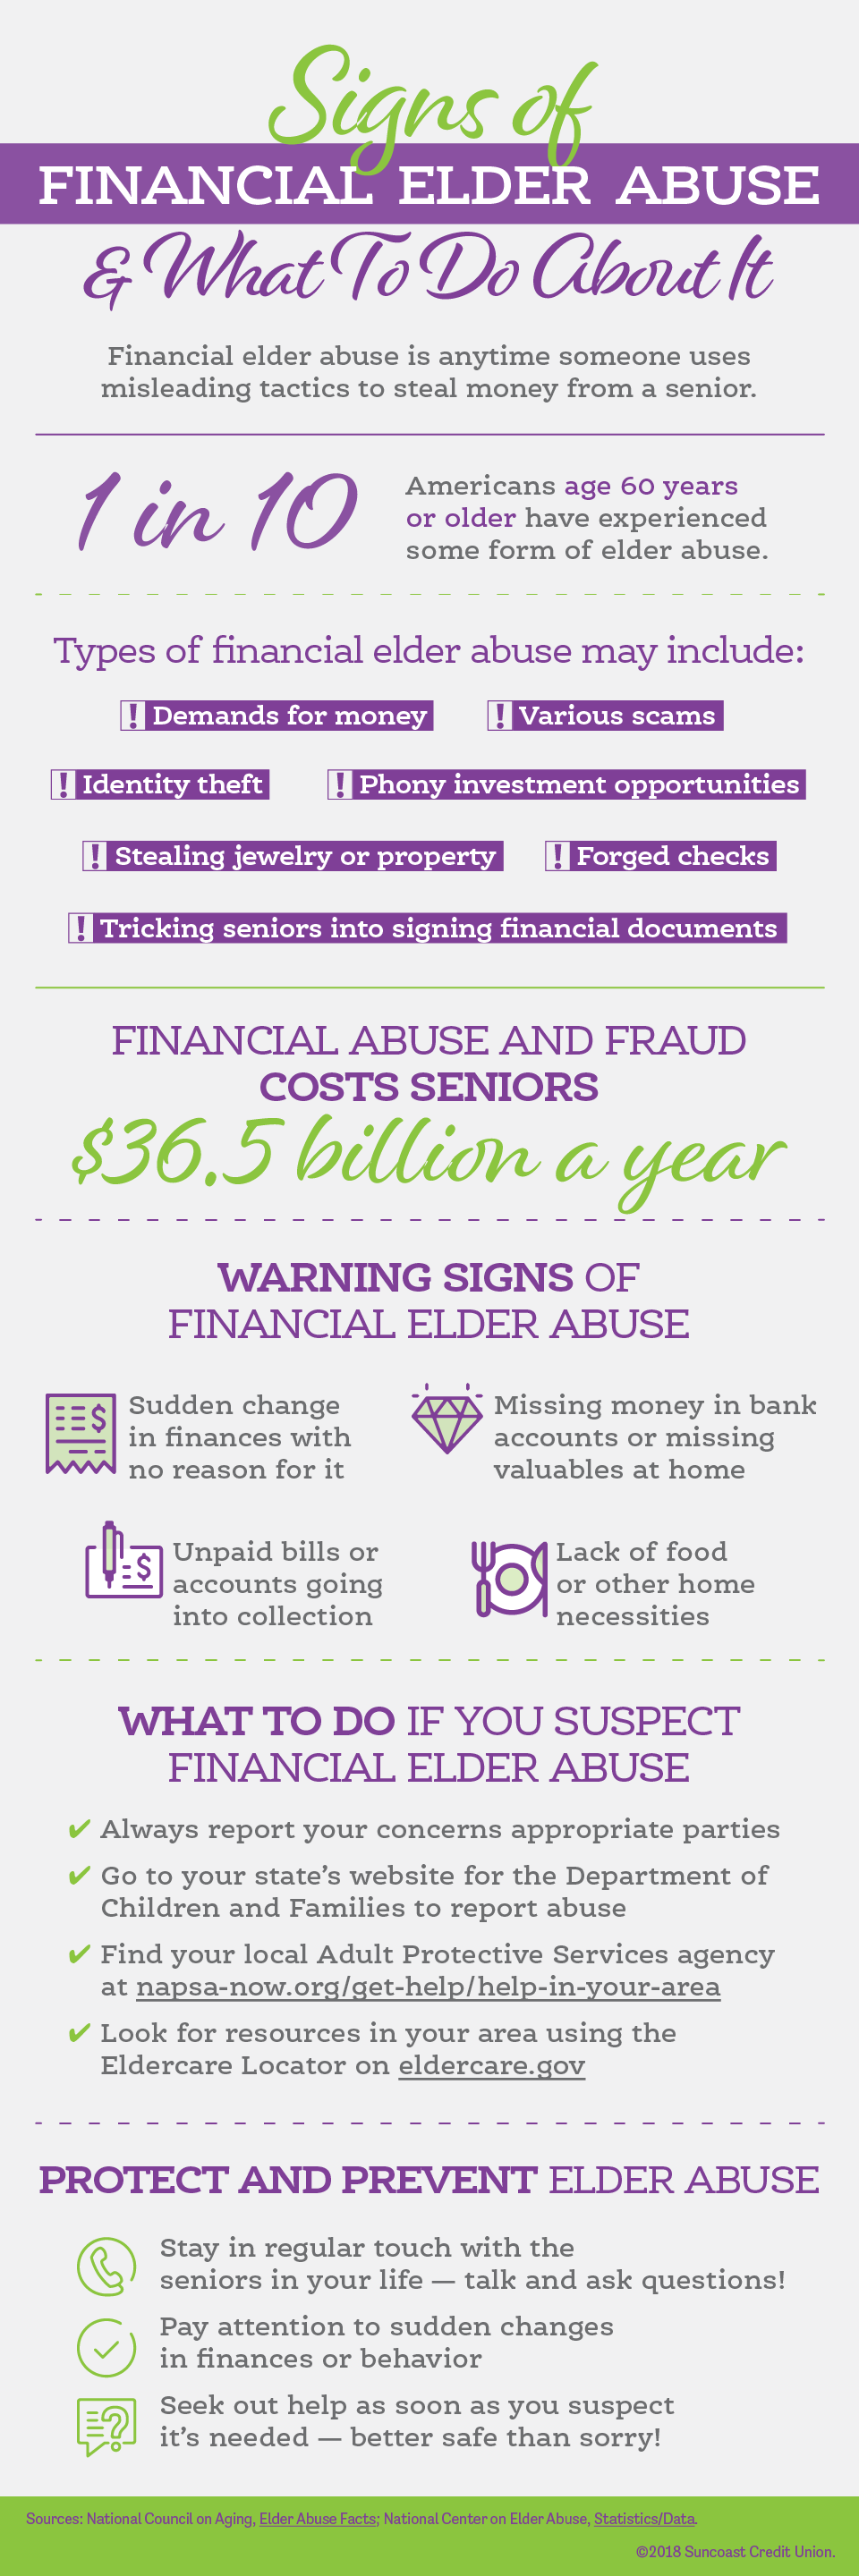 Infographic: Signs of financial elder abuse and what to do about it